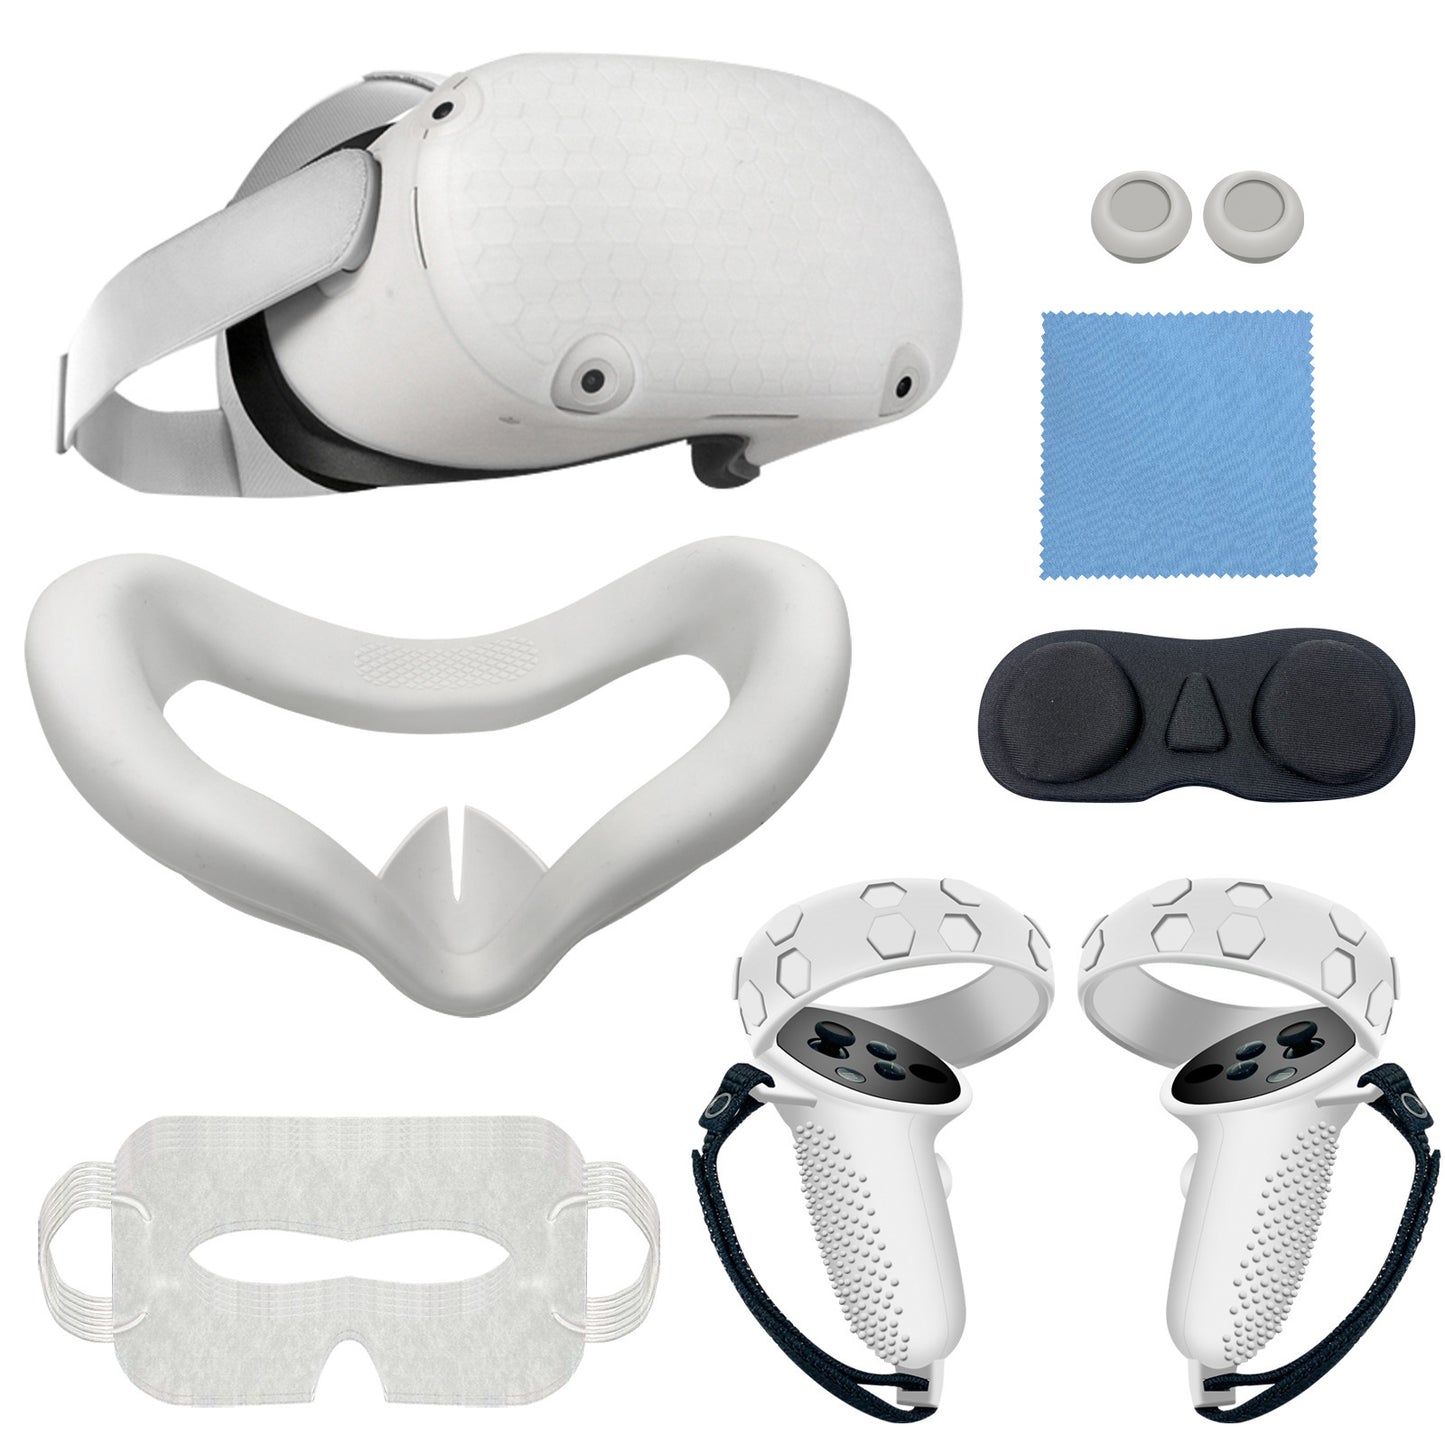 Silicone Protective Sleeve For Handles Host Drop-resistant 7-piece VR Accessories